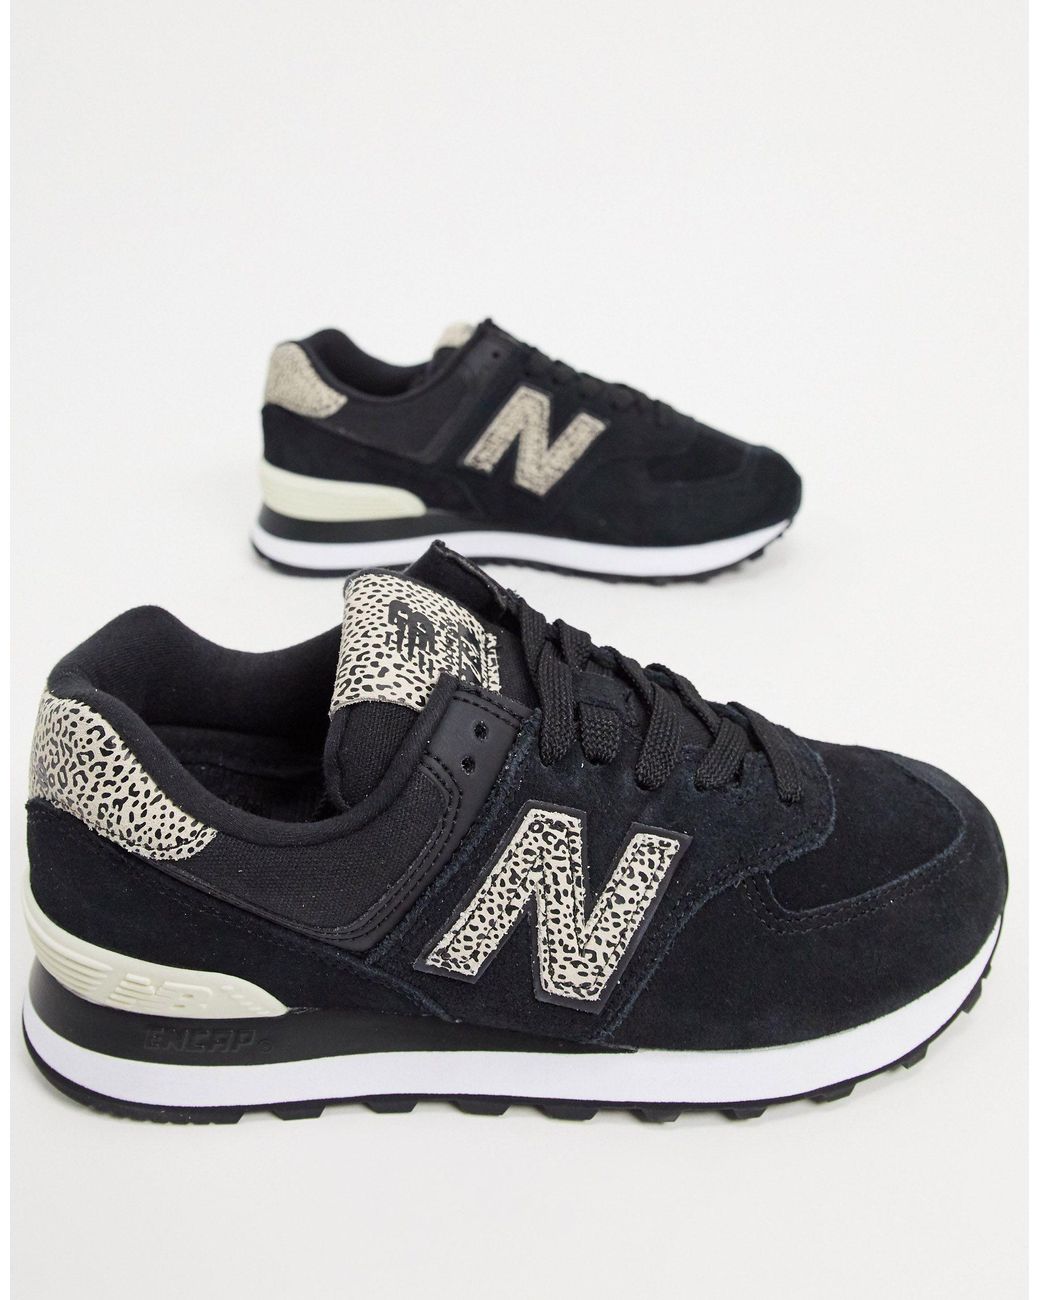 New Balance Rubber 574 Animal Print Trainers in Black | Lyst